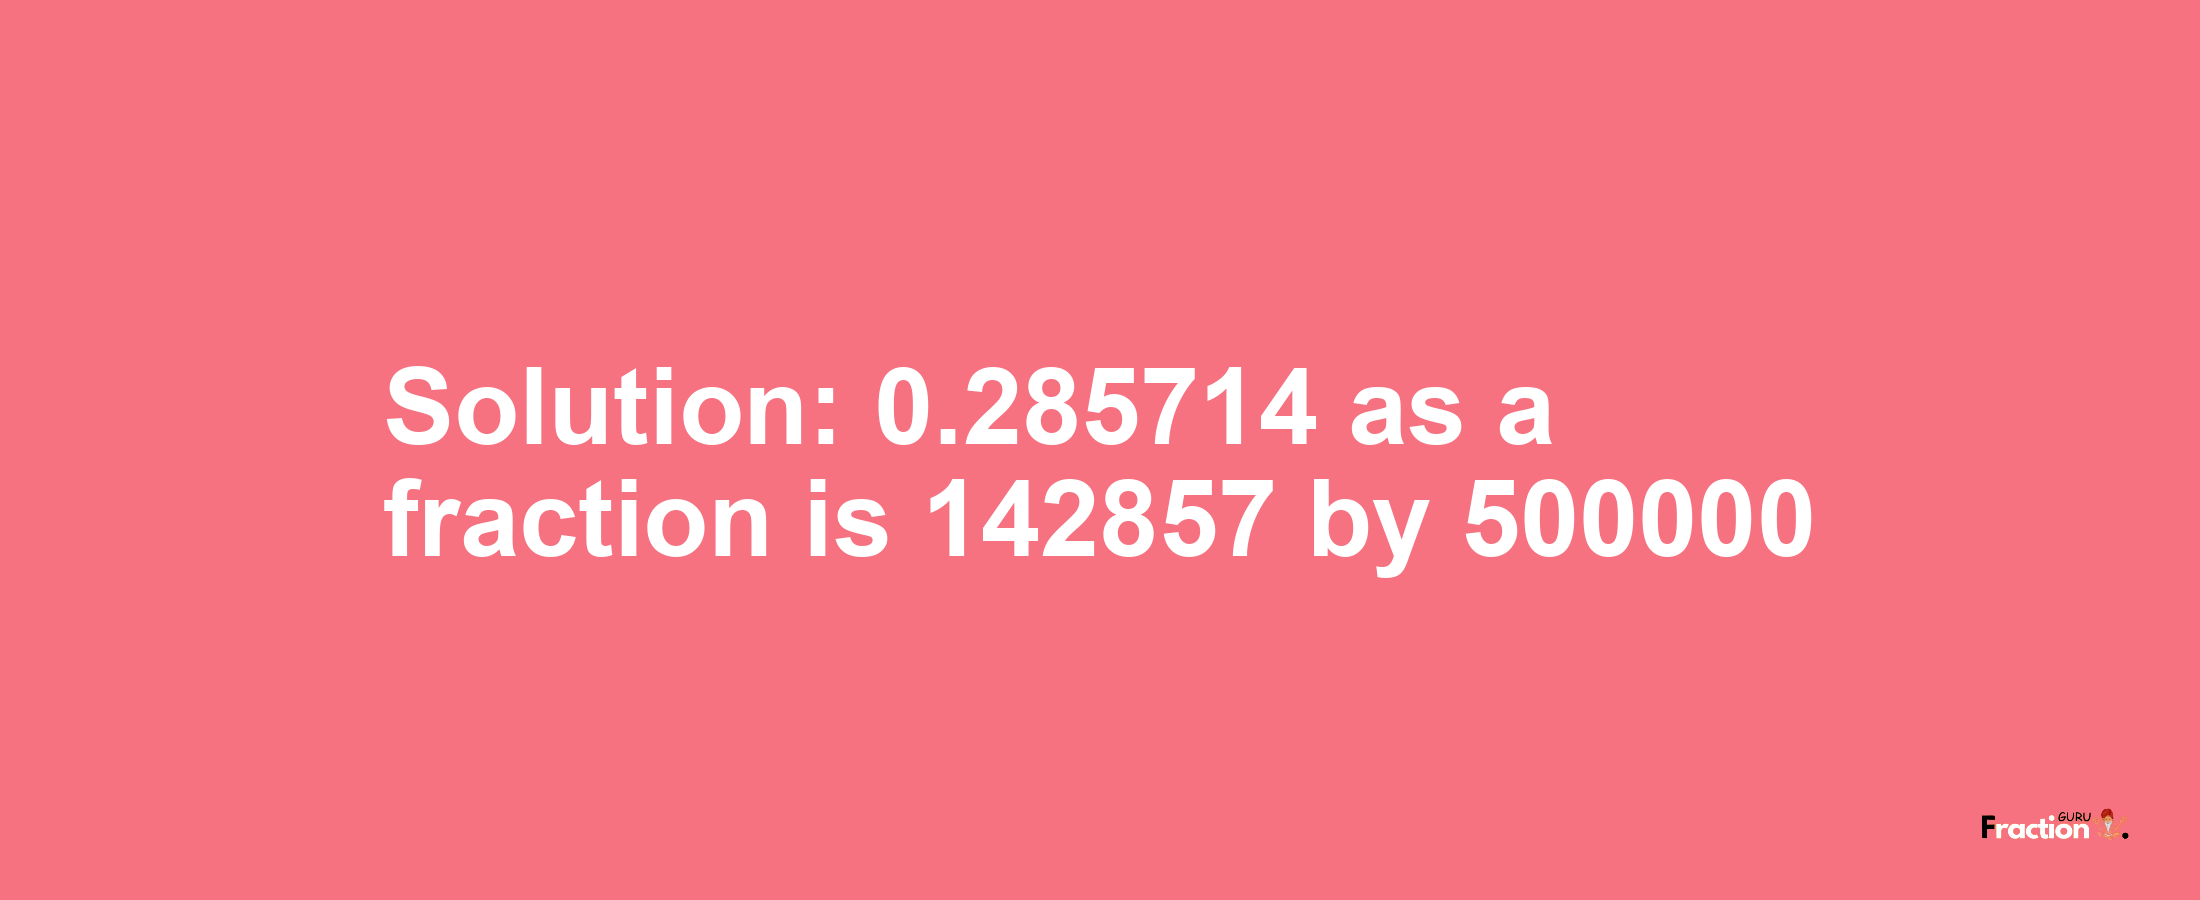 Solution:0.285714 as a fraction is 142857/500000